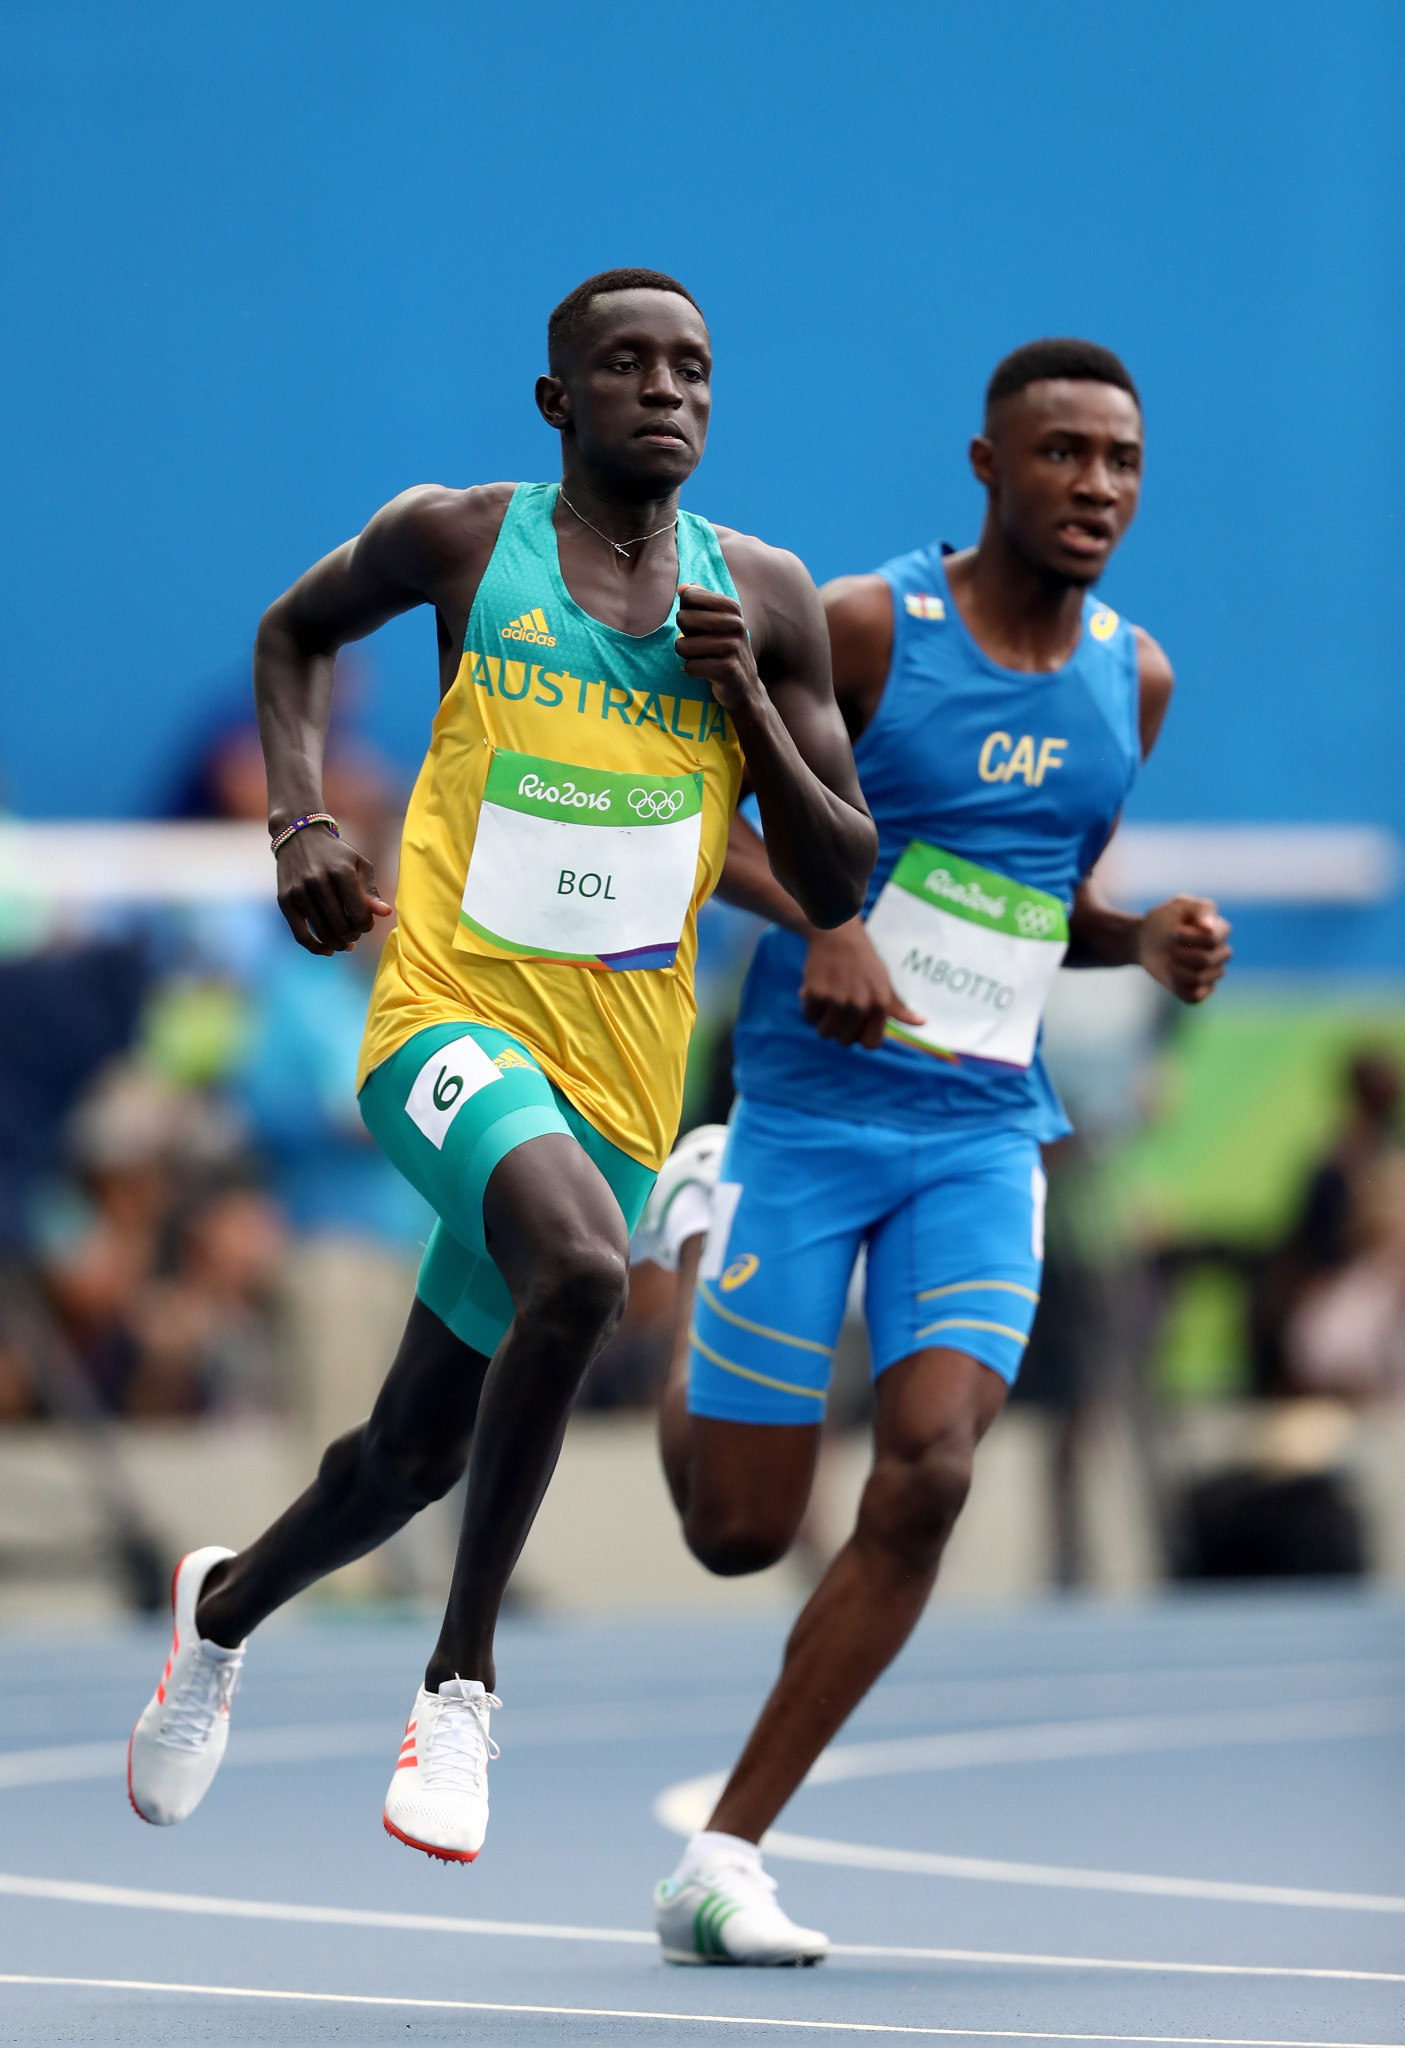 The Central African Republic sent a team of six to the Rio 2016 Olympics ©Getty Images